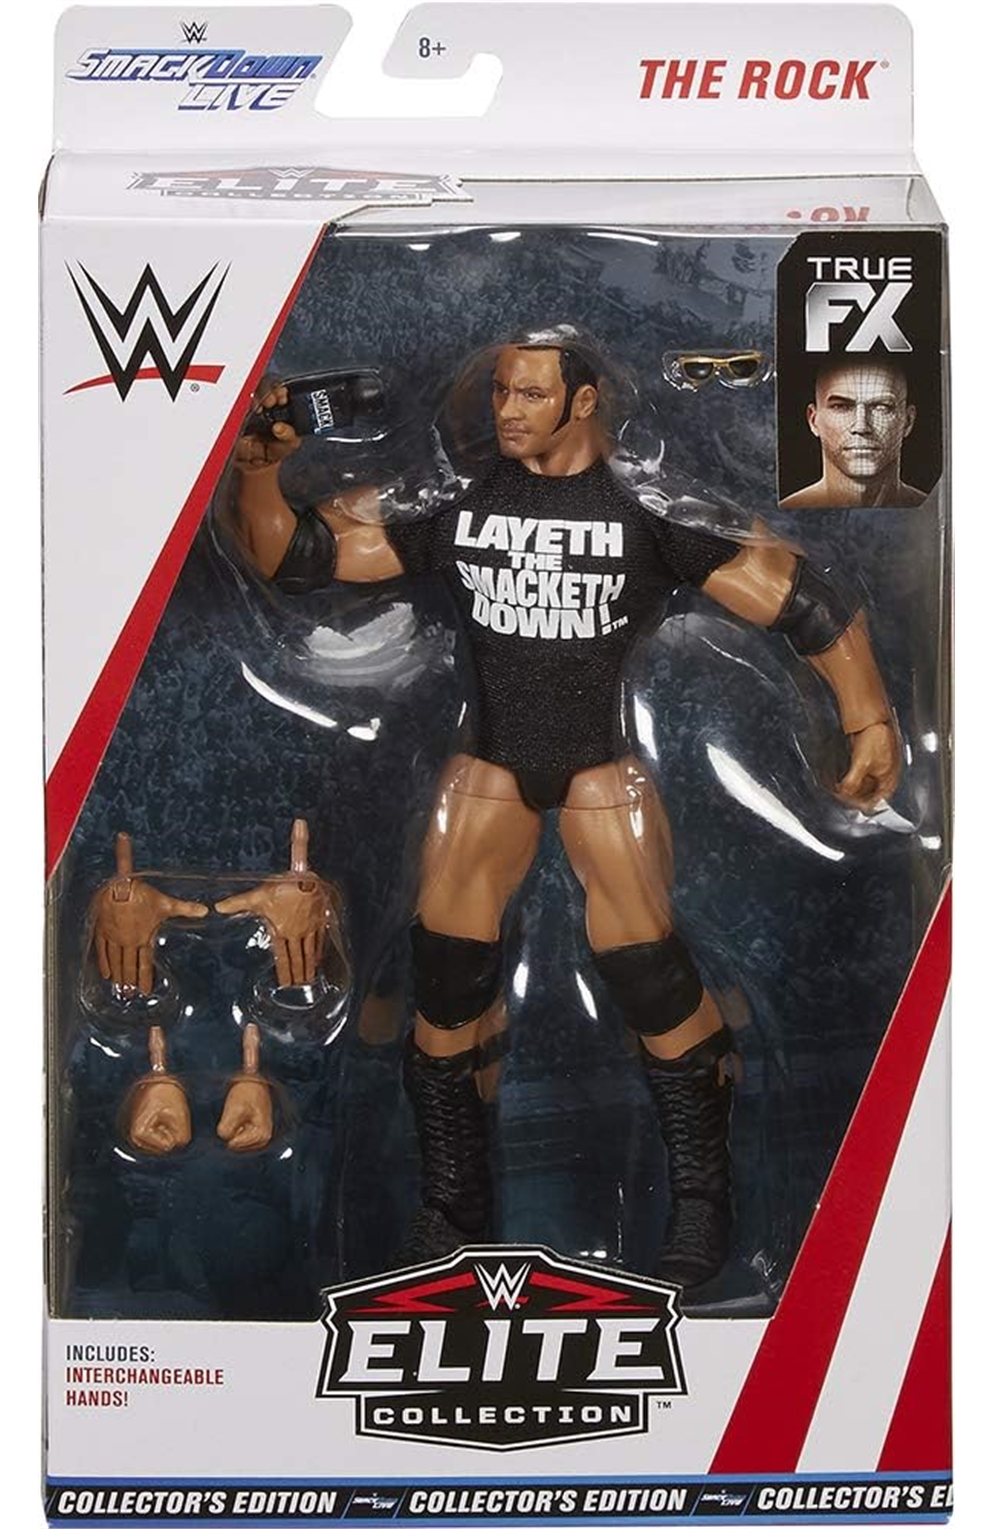 Wwe Smakdown Live Elite Collection The Rock 